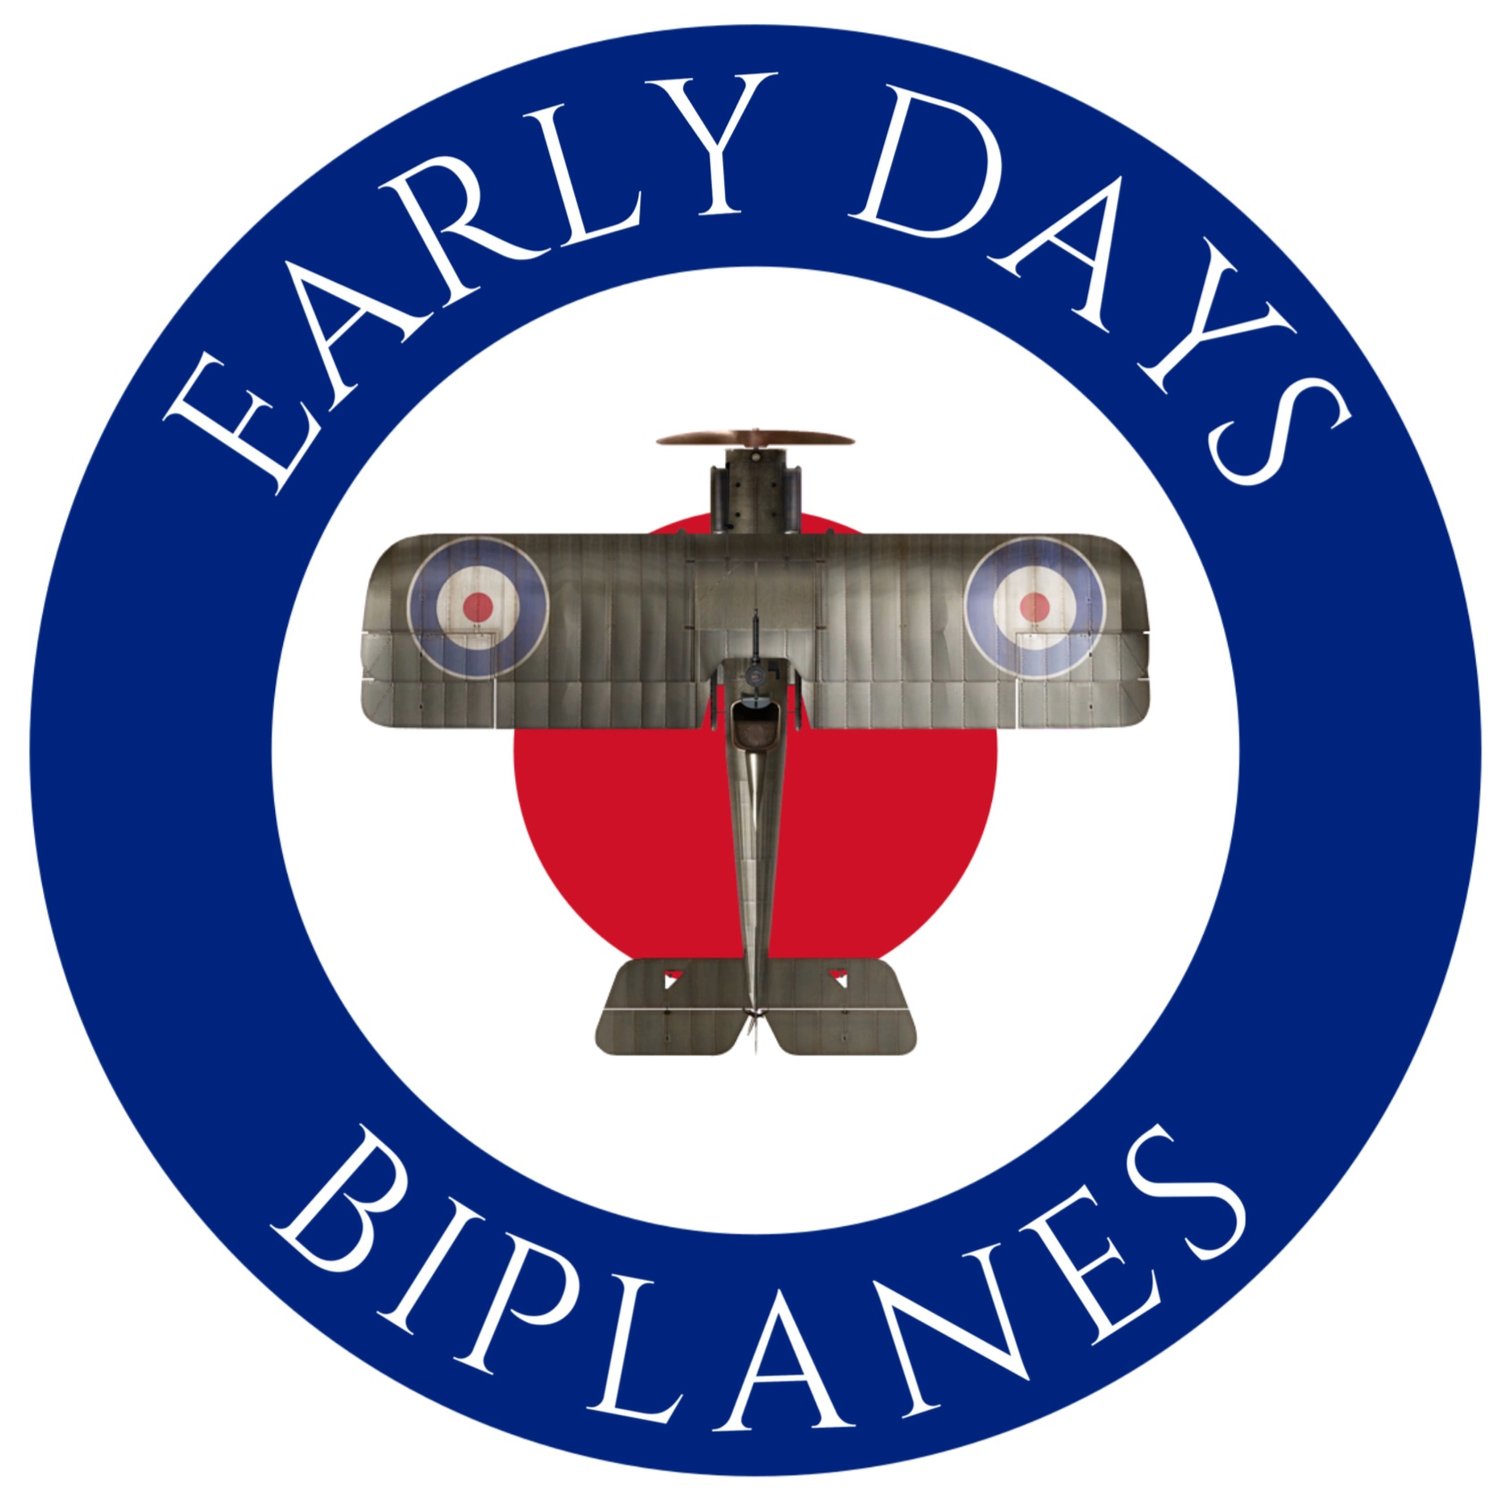 Early Days Biplanes